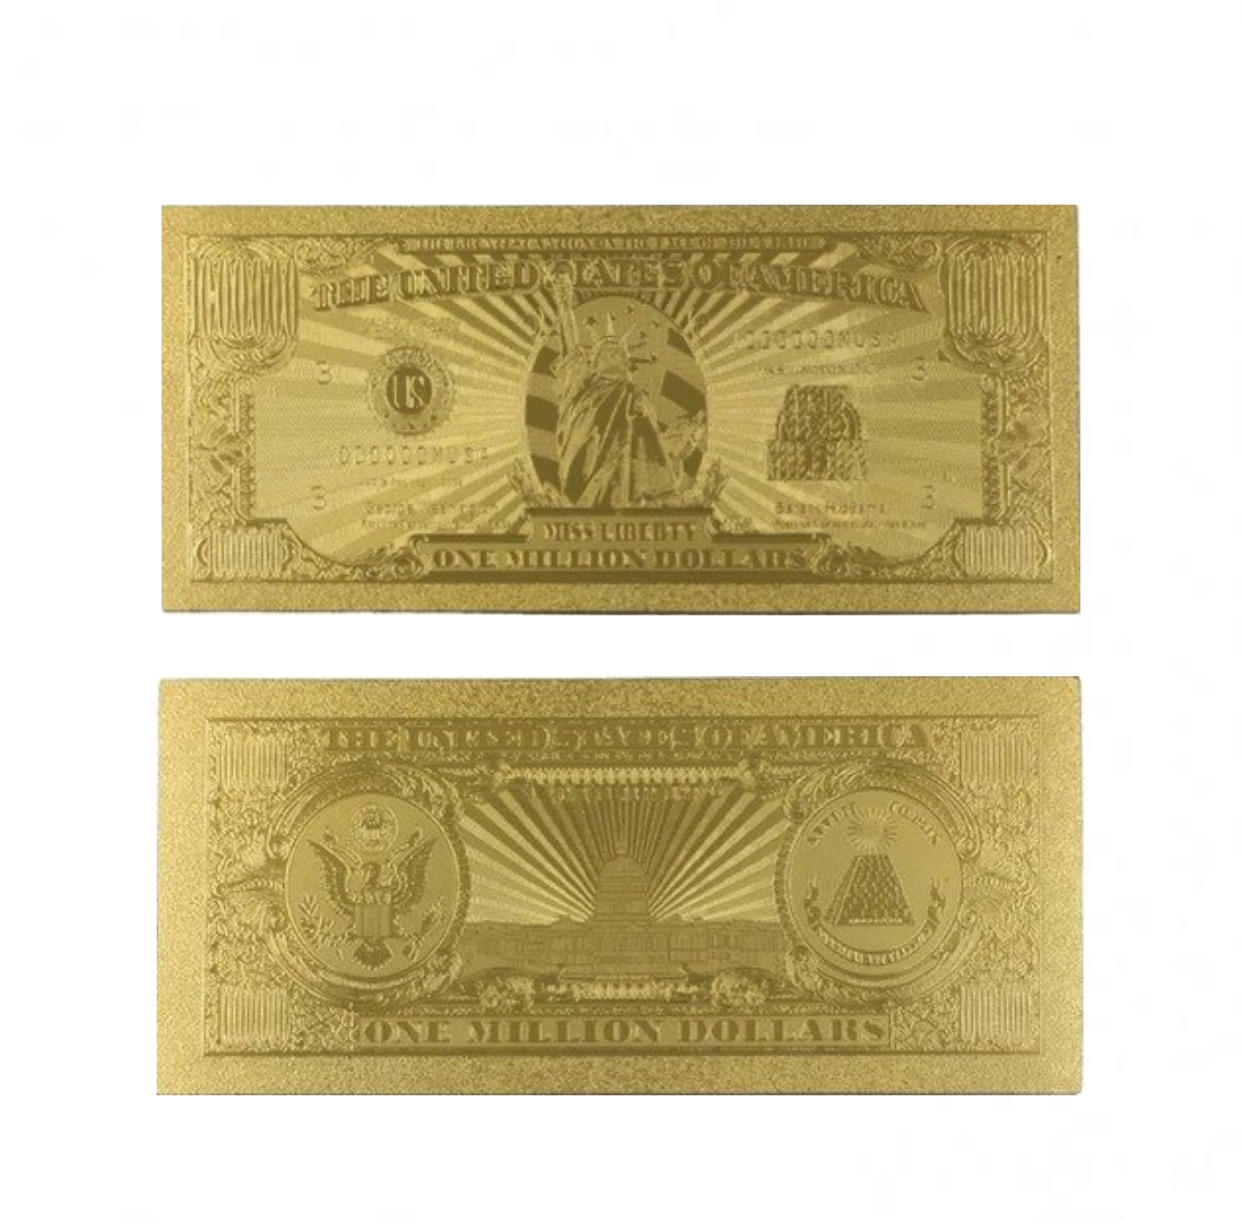 Miss Lady Liberty 1 Million Dollars Original 24K Gold Plated Bill Collectible Banknotes for Decoration 24K Gold and Silver Plated Replica Bills 5